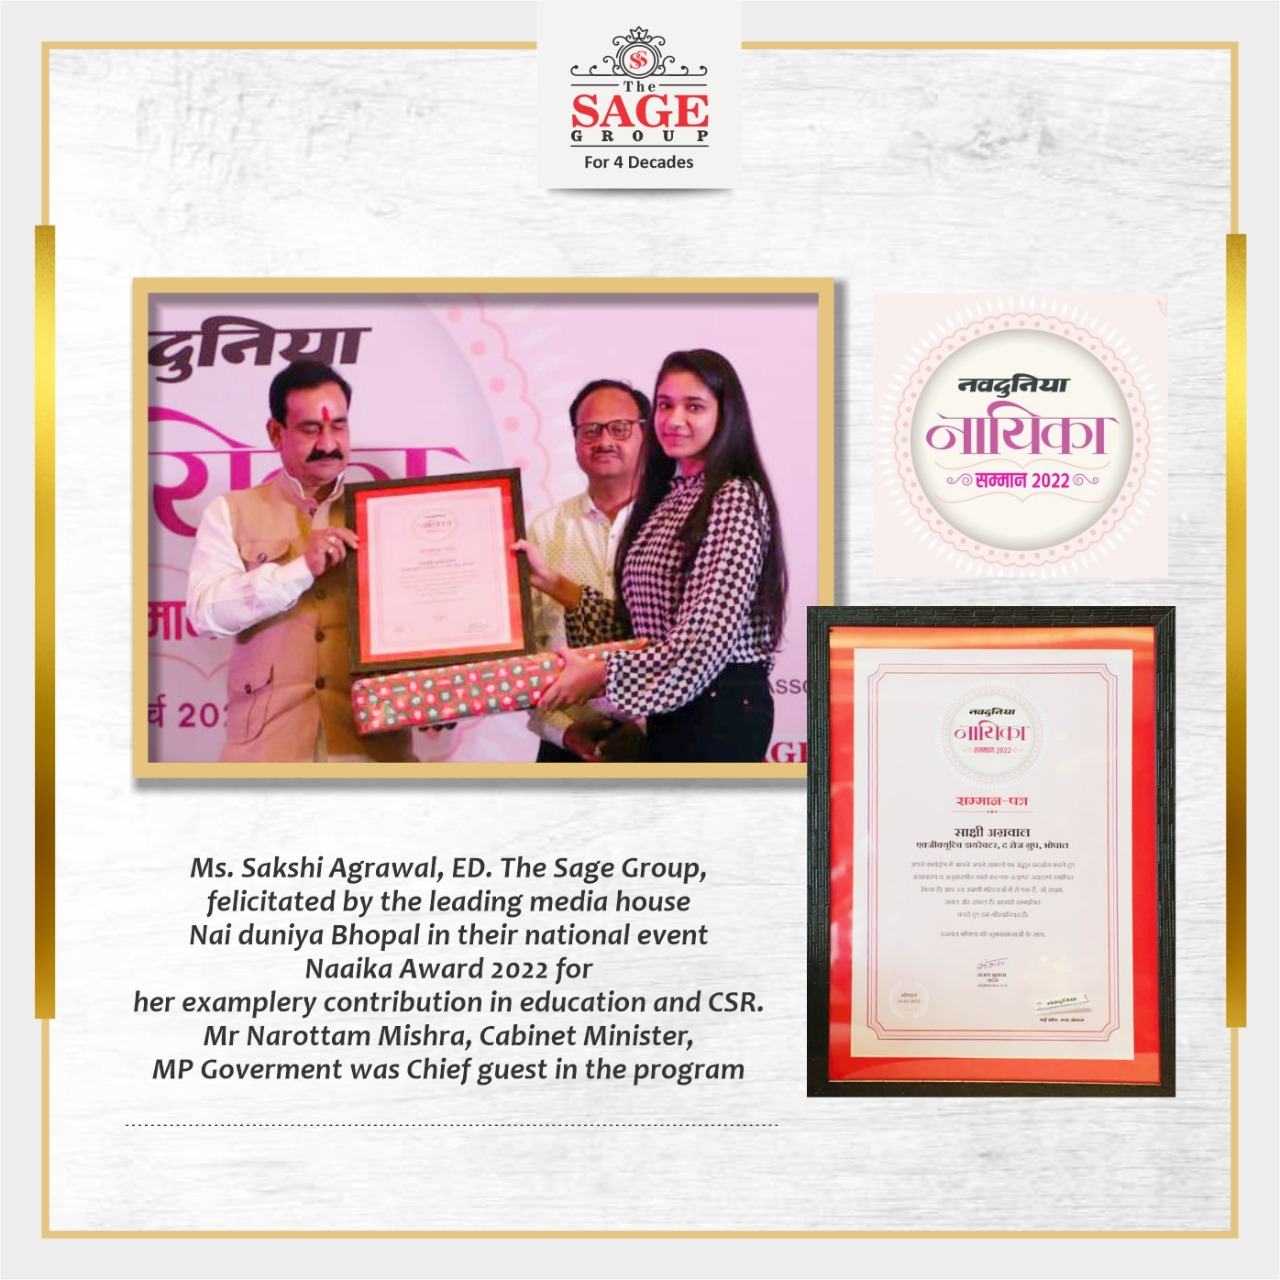 National event Naaika Award 2022 for her exemplary contribution in education and CSR